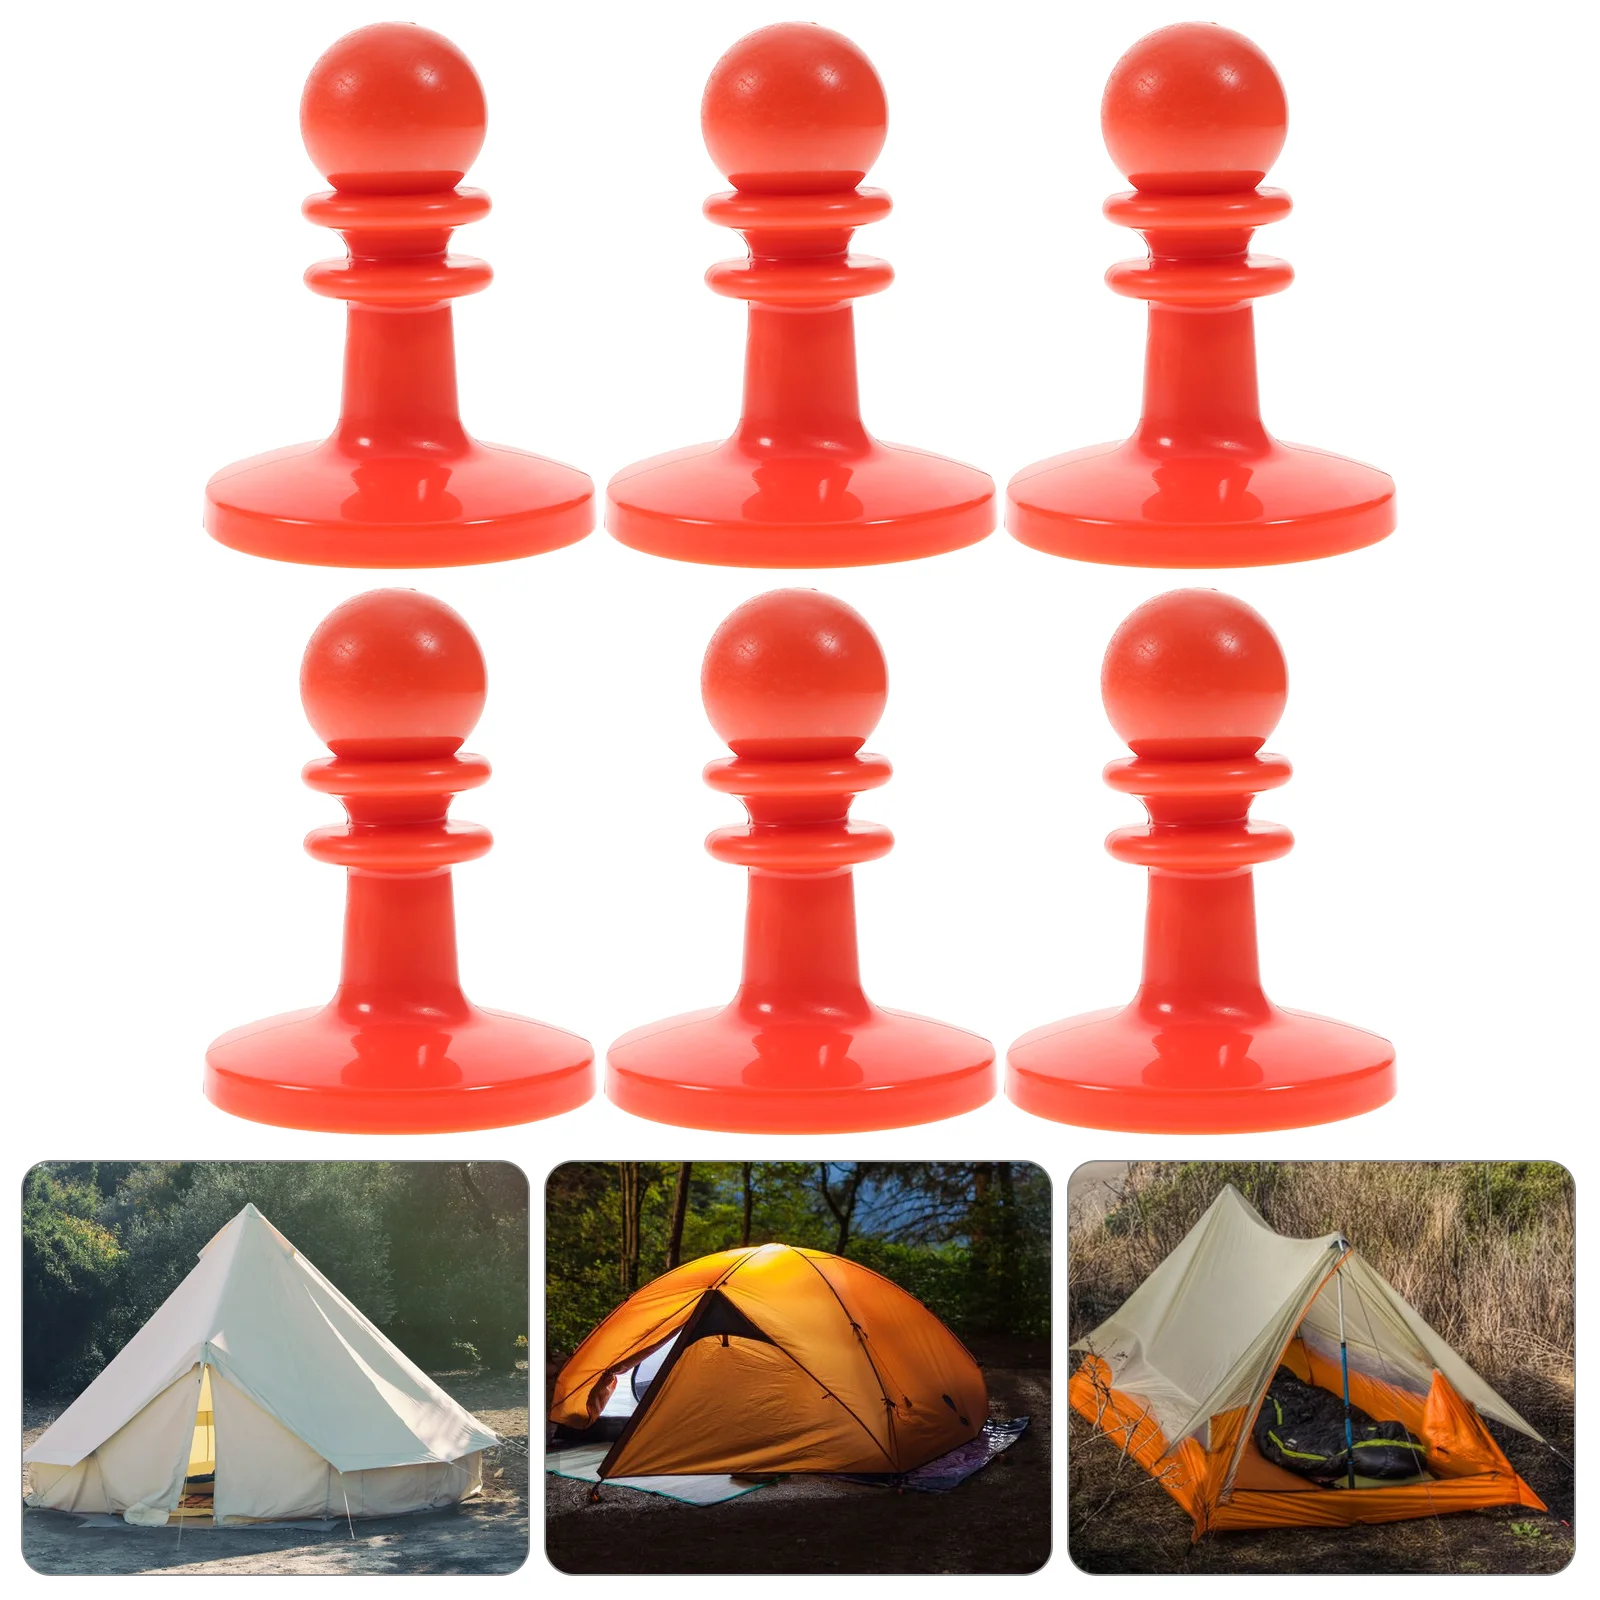 

8pcs Tent Tent Poles Protector Outdoor Tent Canopy Awning Cover for Camping Hiking Backpacker Outdoor Red